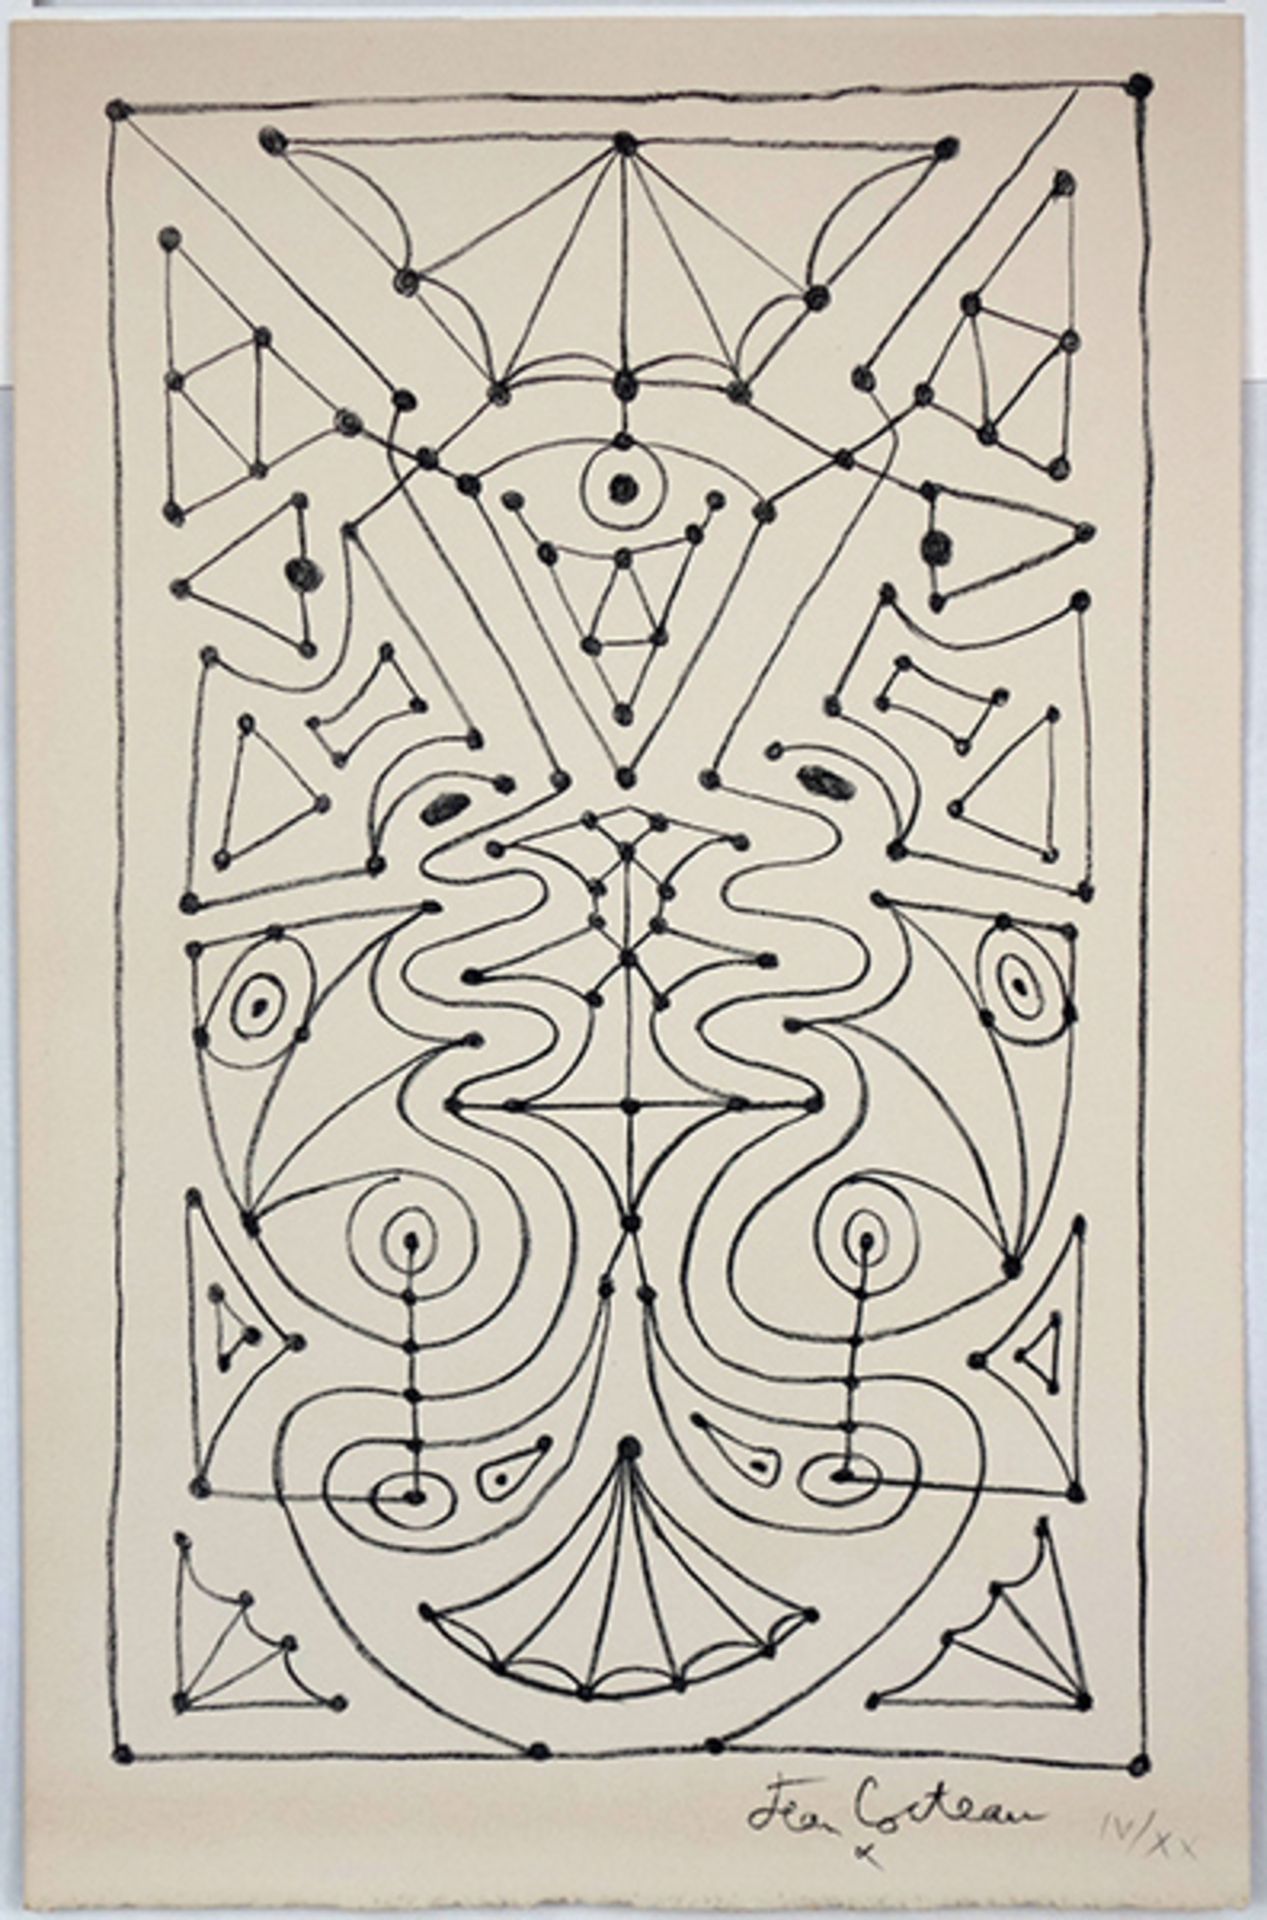 Geometrie decorative I (1958)Lithograph on arches paper. Signed in the stone. Numbered "IV/XX". From